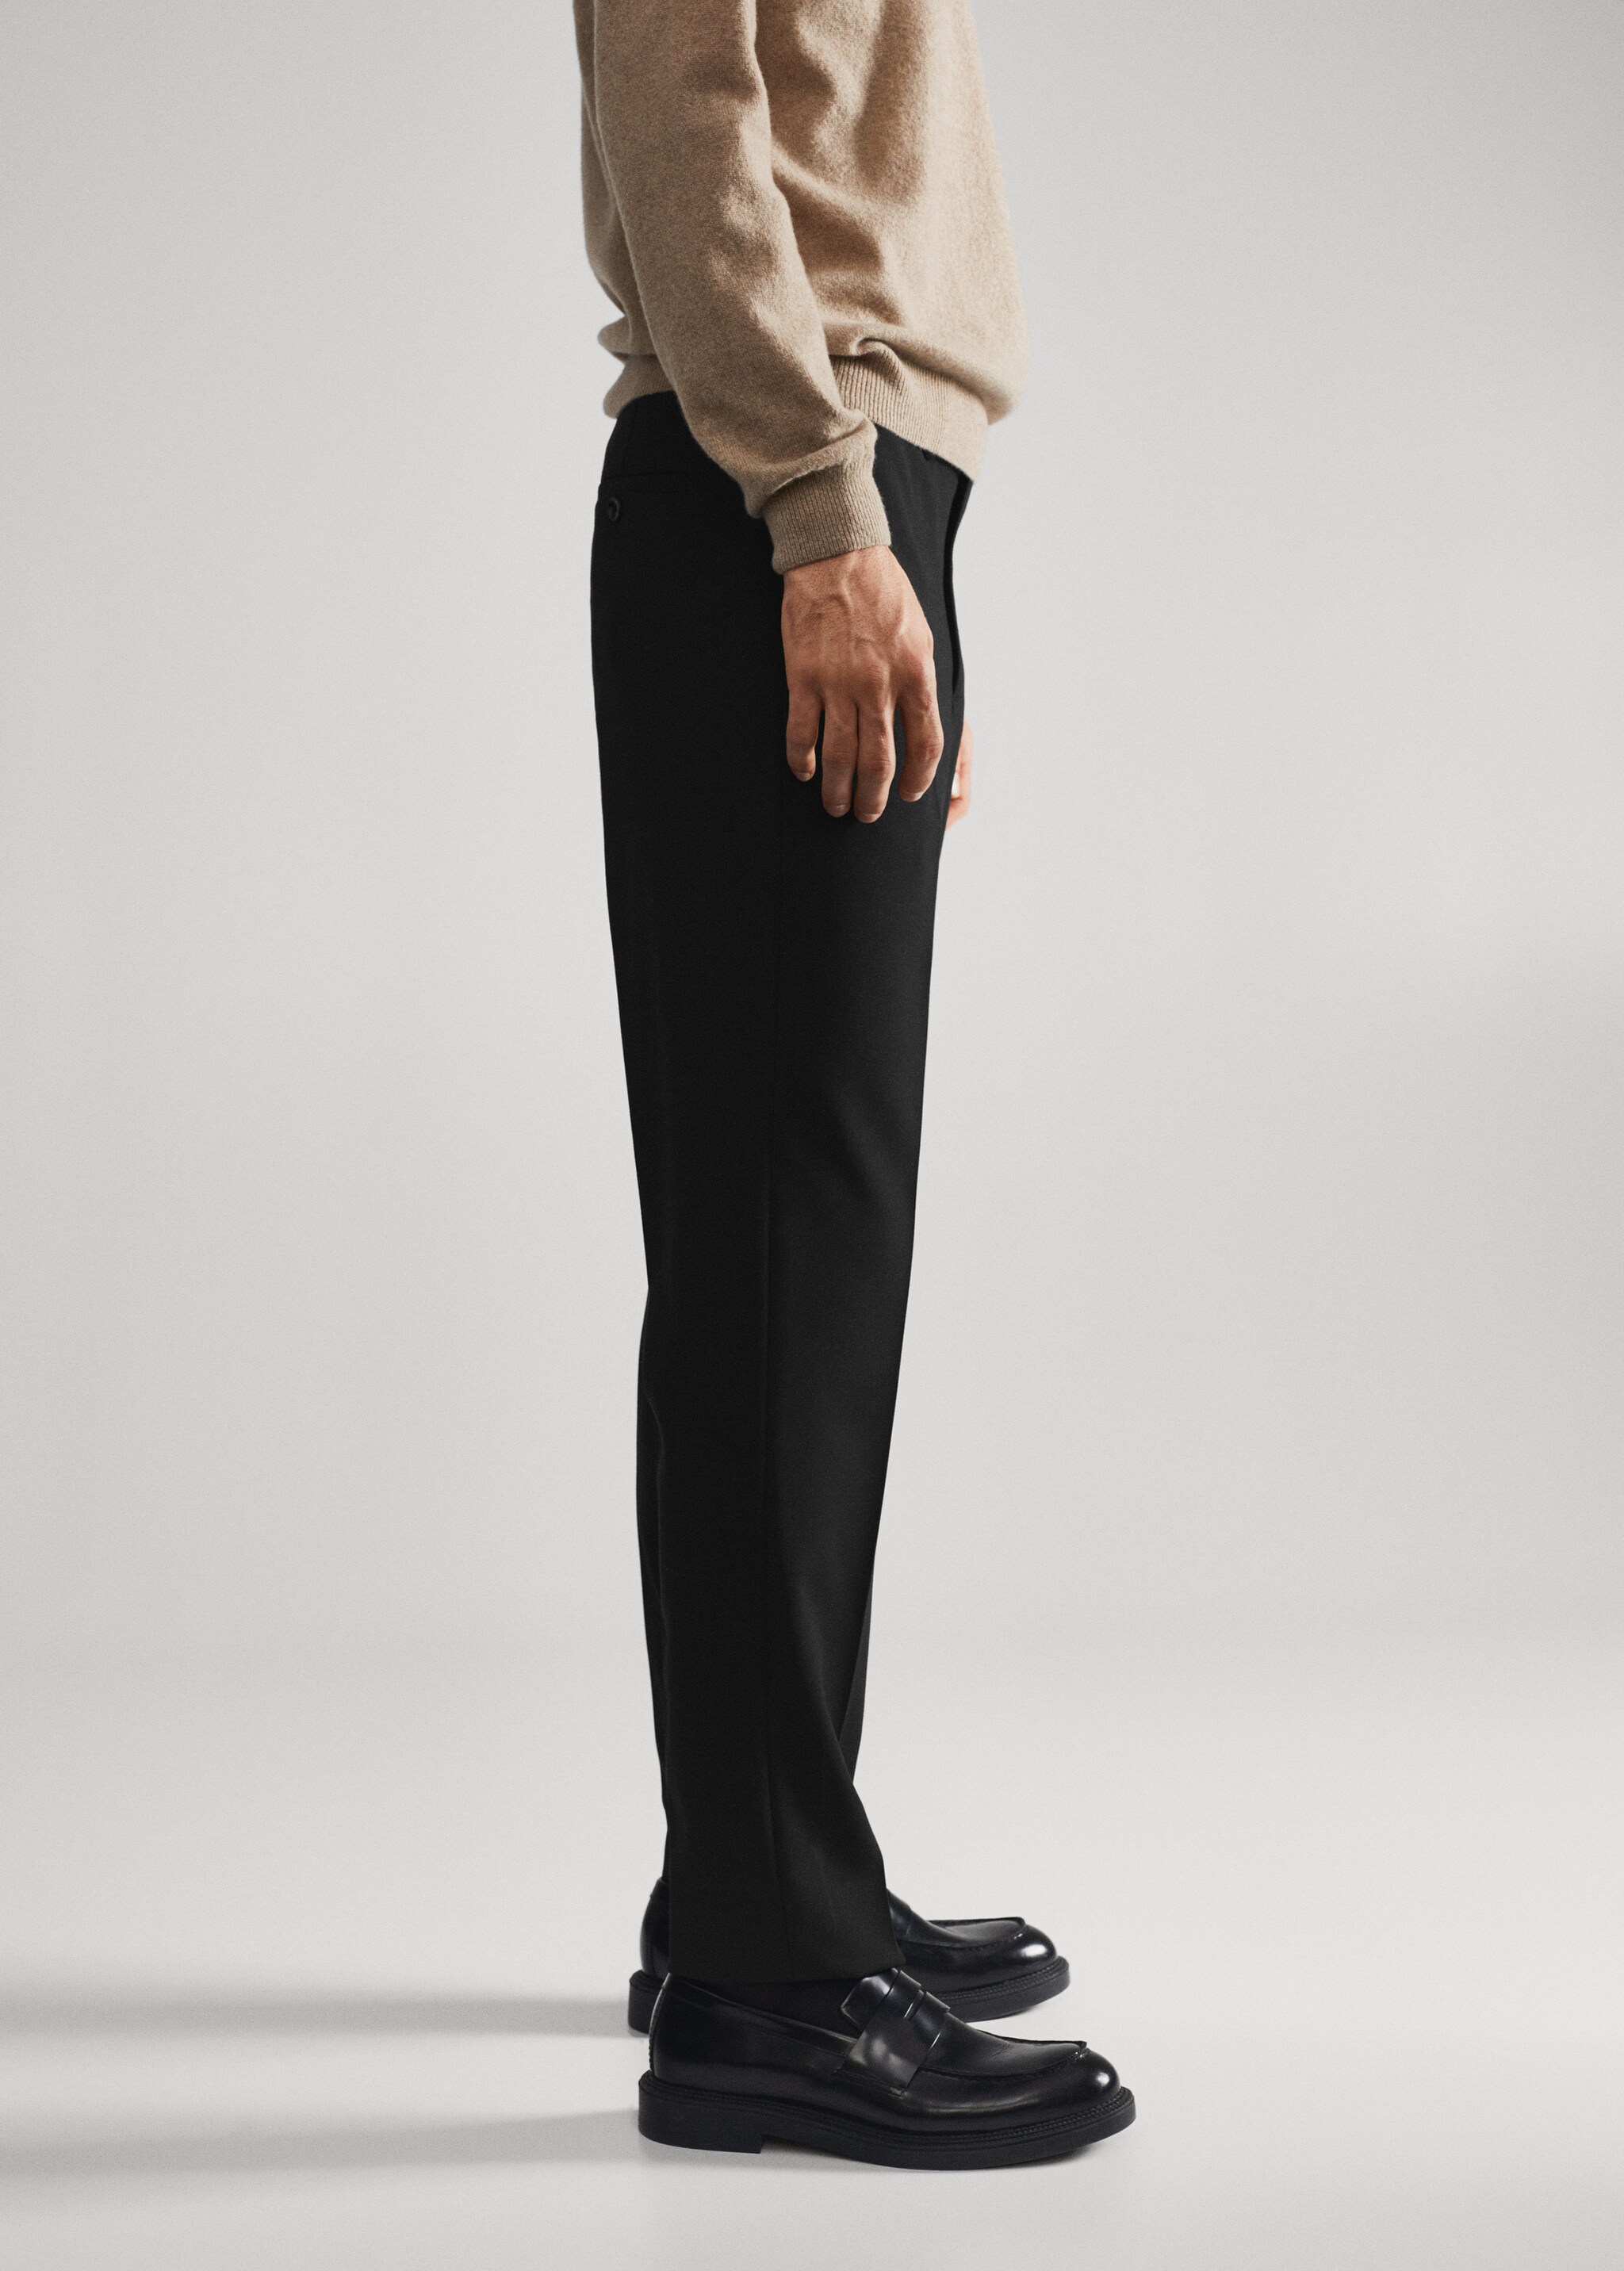  Suit trousers - Details of the article 6